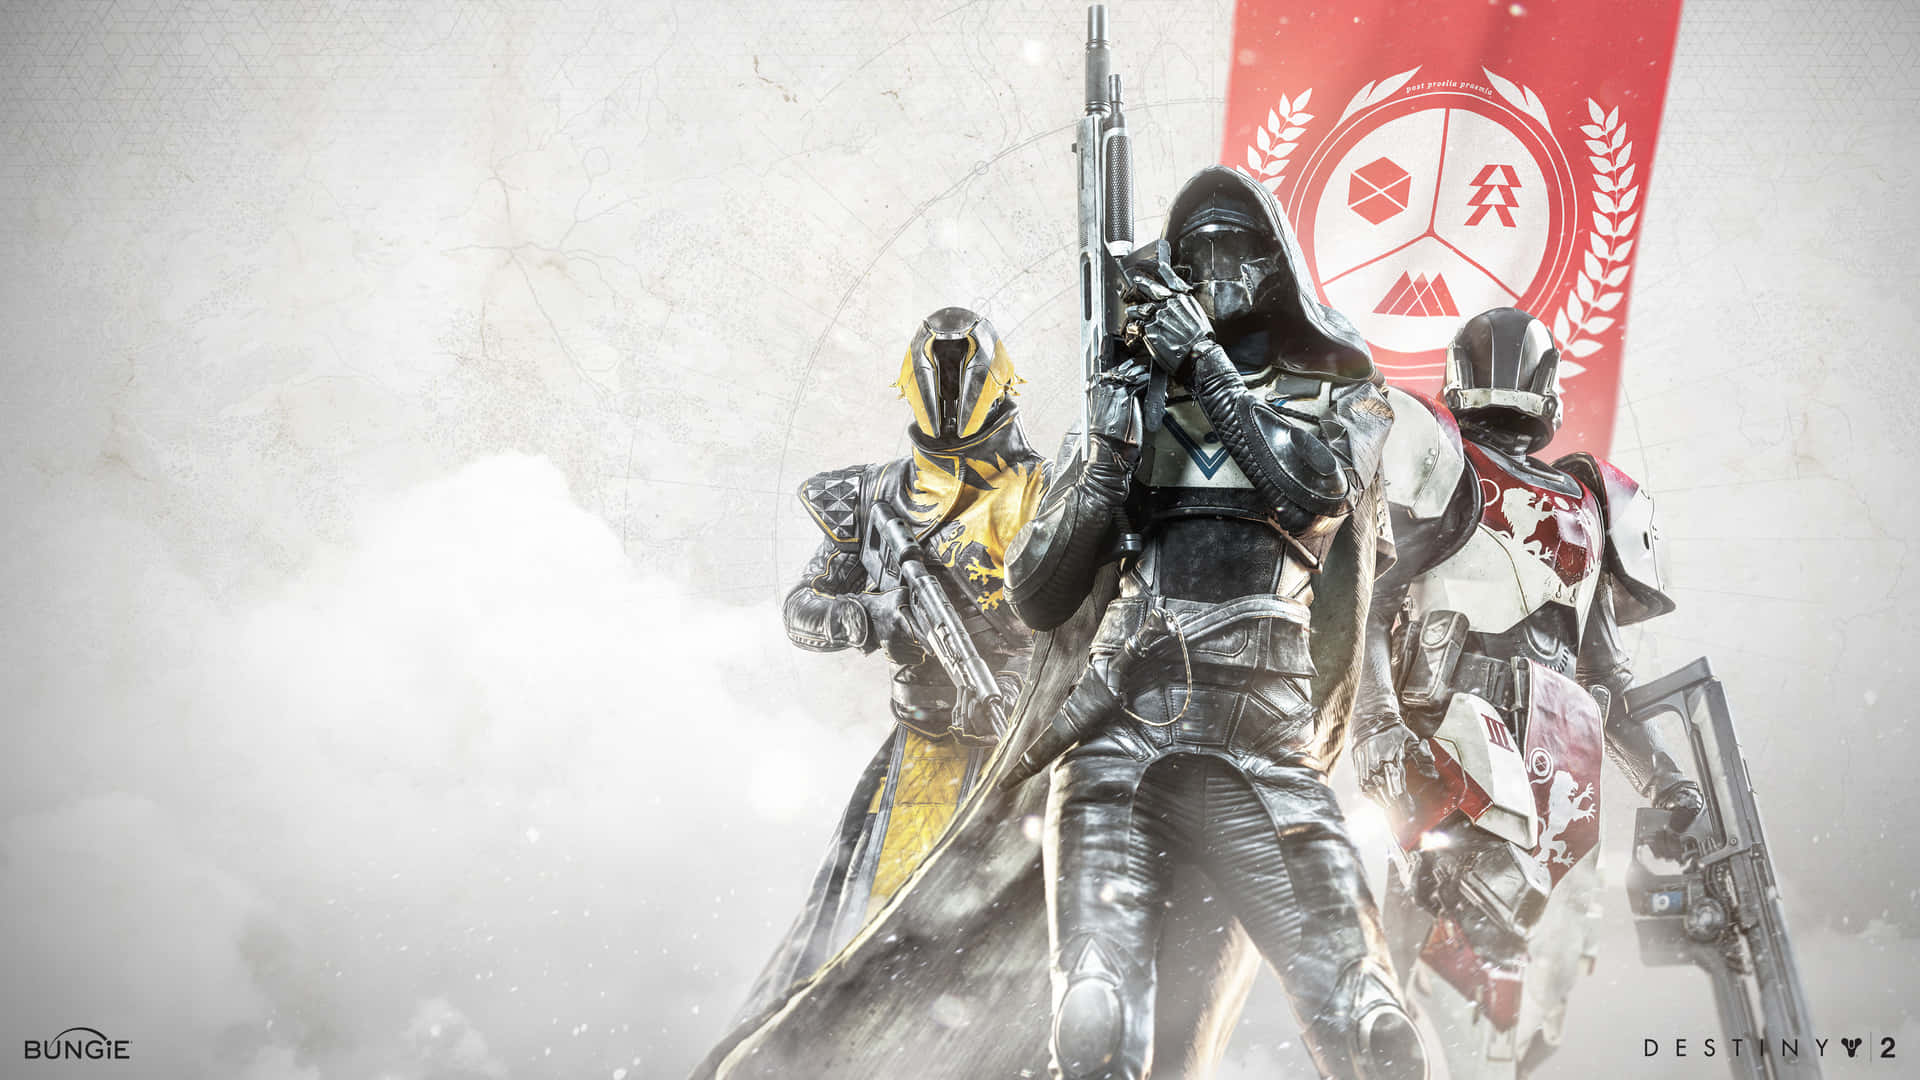 Enter a World of Sci-Fi Adventure with Titan from Destiny 2 Wallpaper